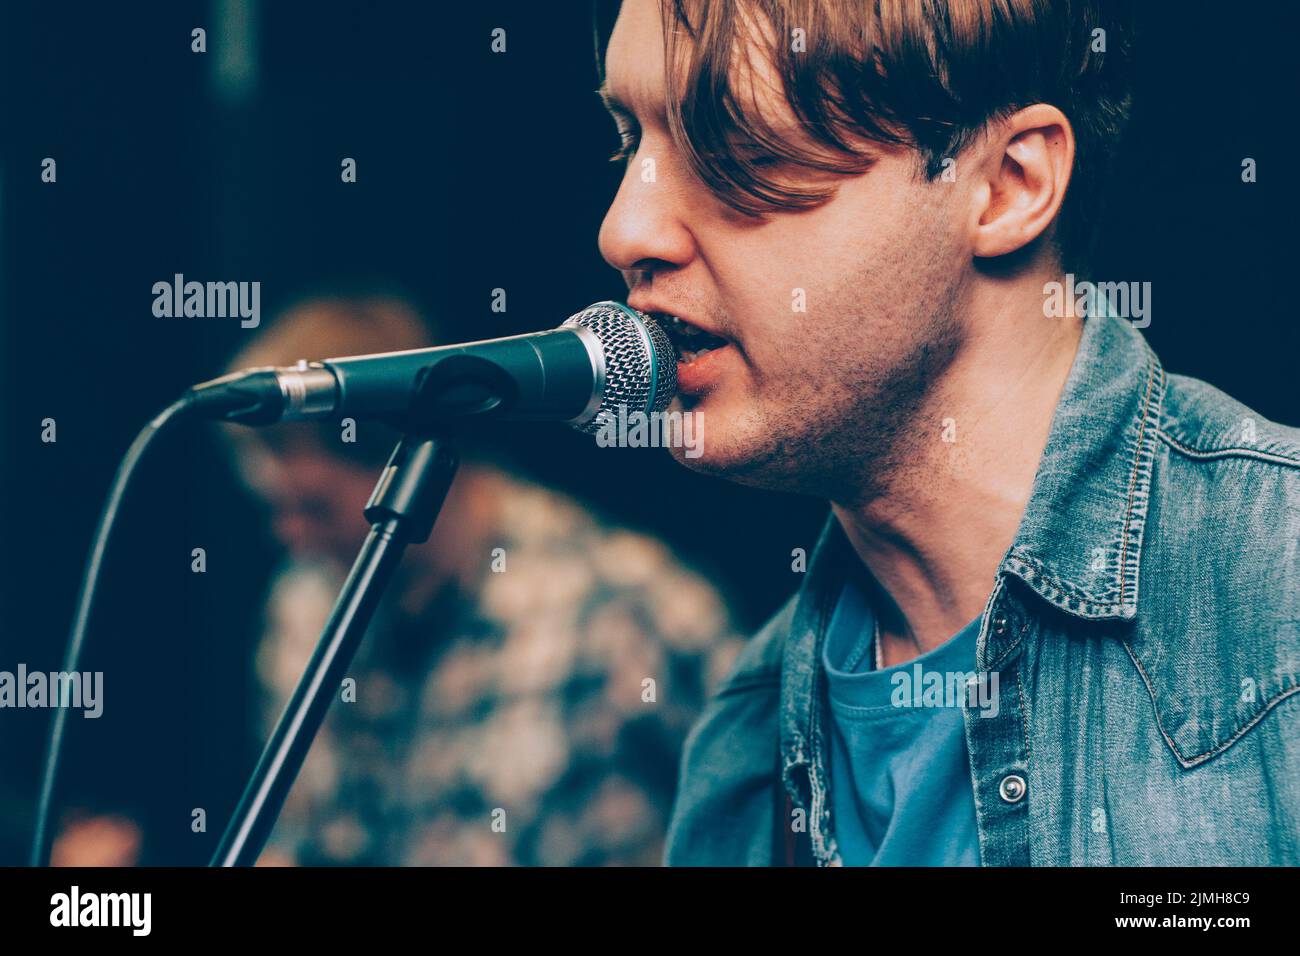 live music concert professional singer microphone Stock Photo